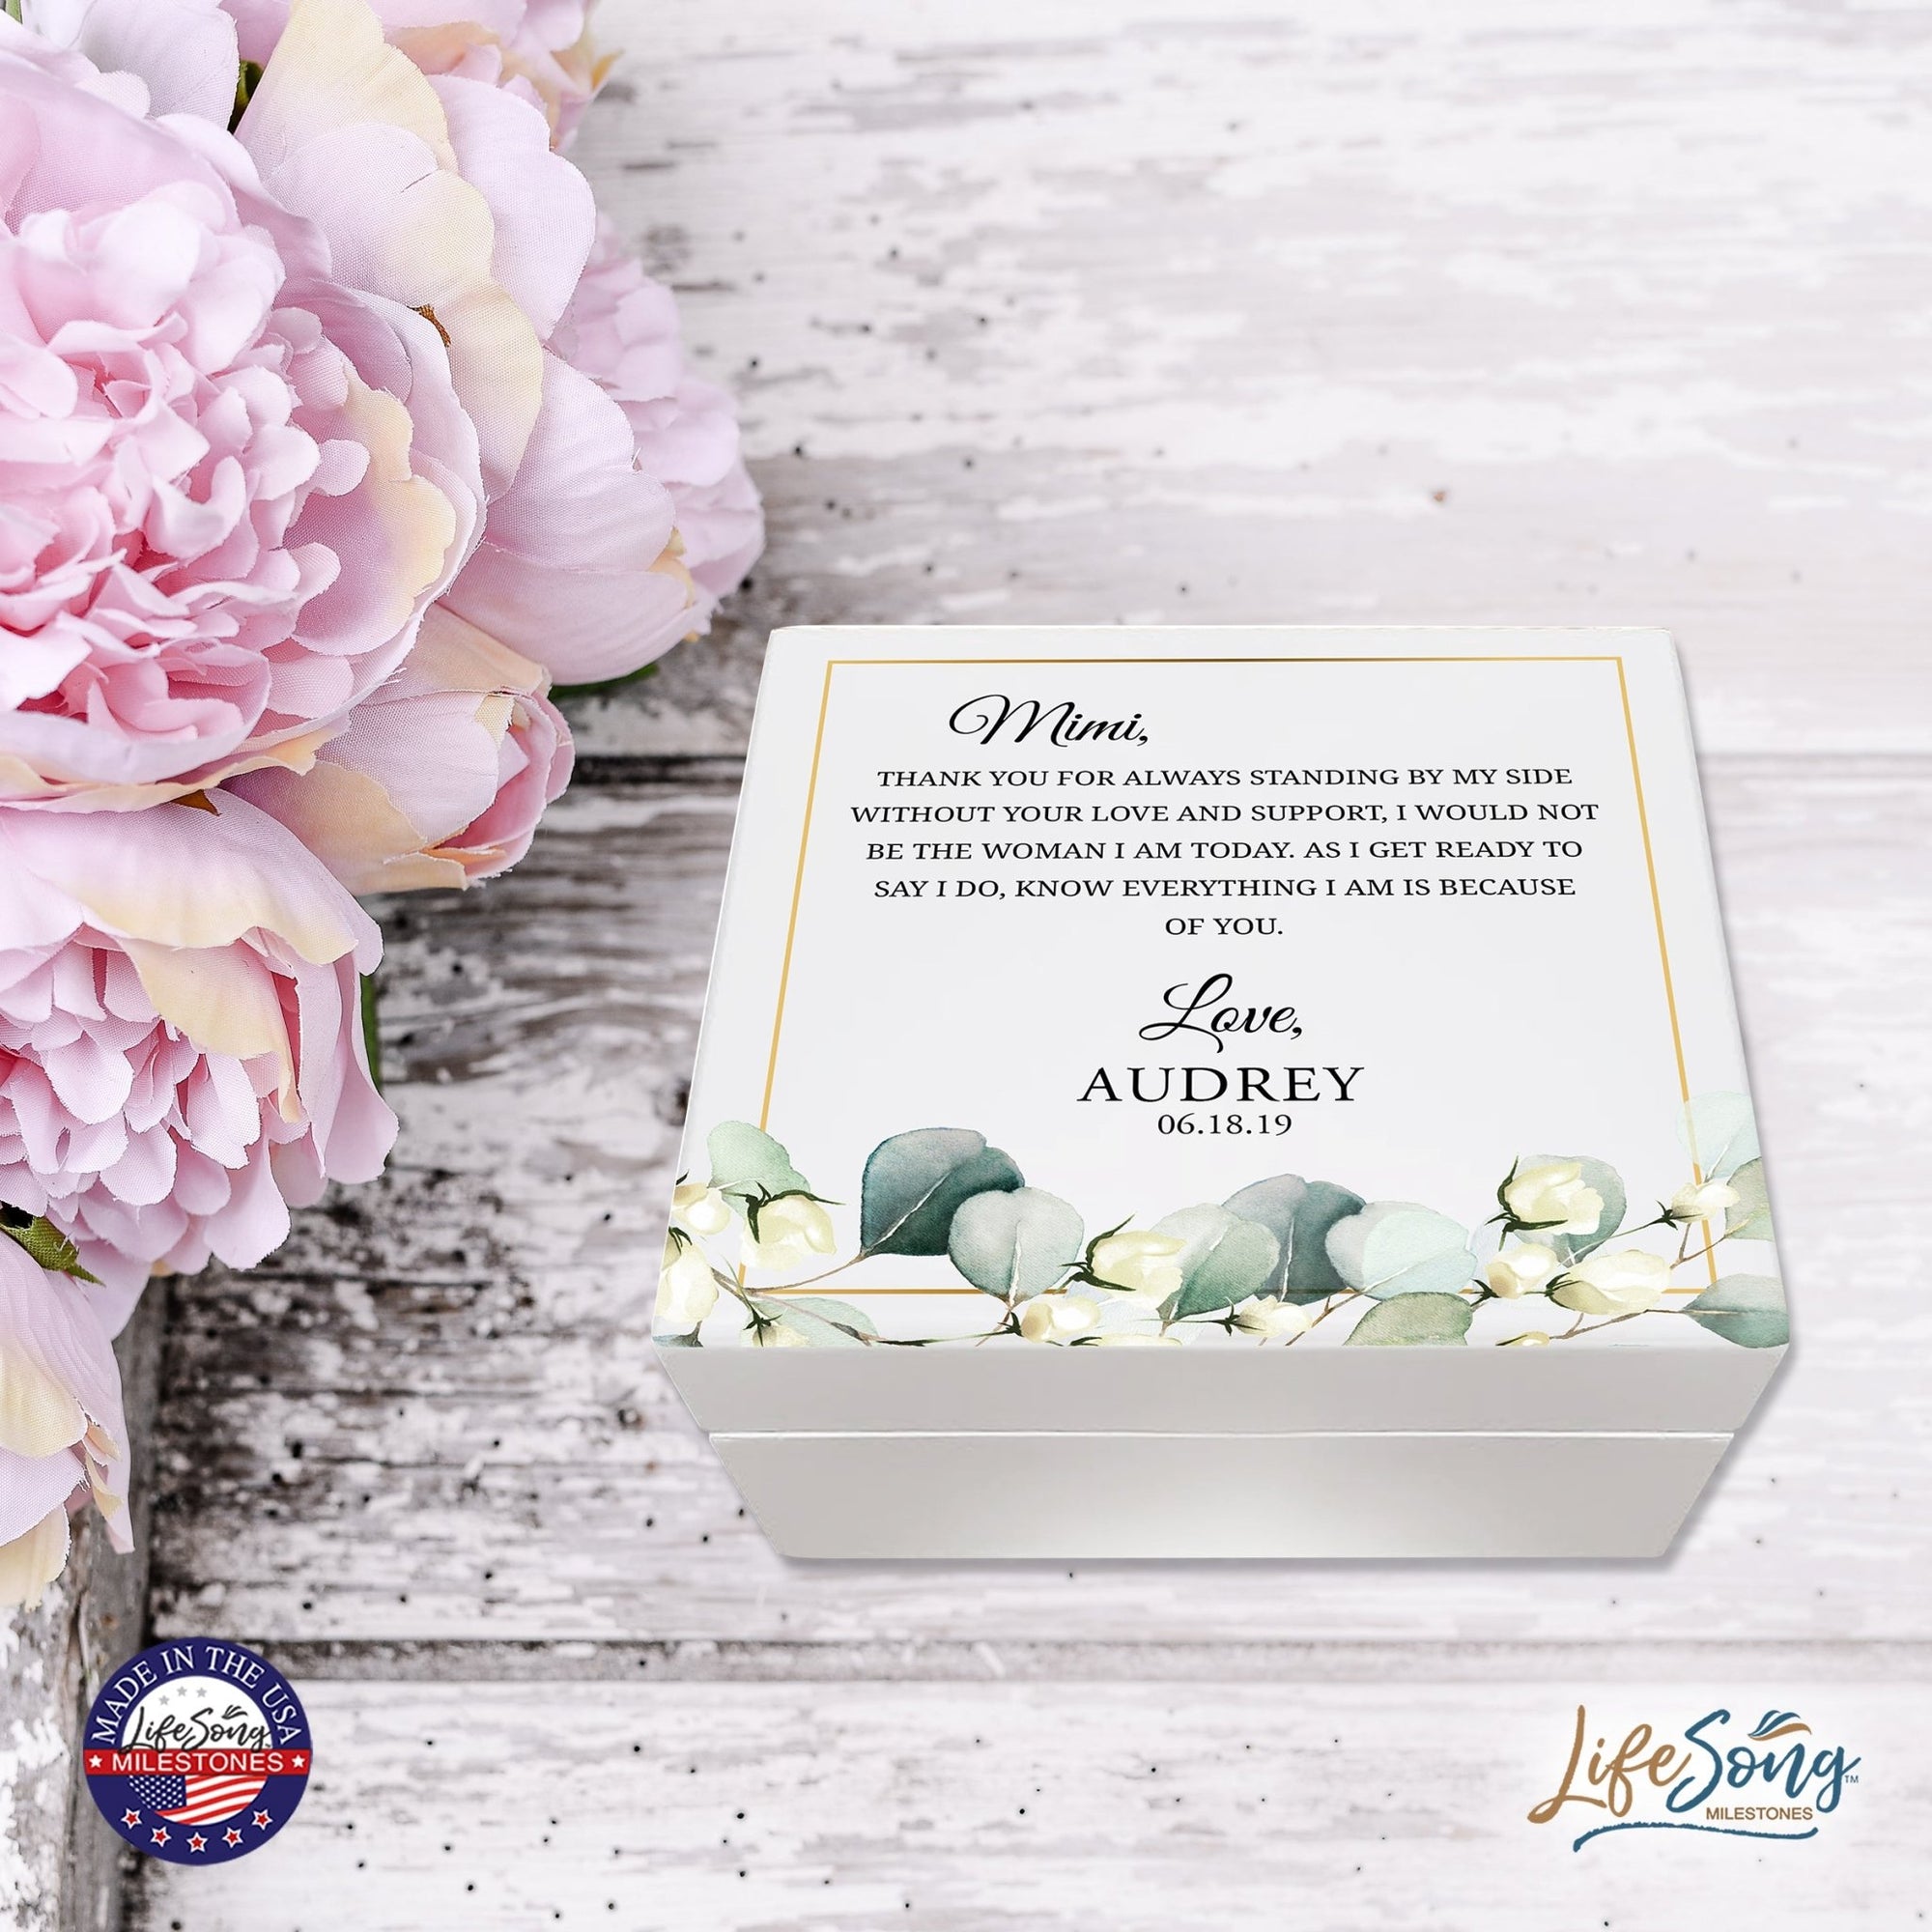 Personalized Mimi’s White Keepsake Box 6x5.5in with Inspirational verse - Thank You - LifeSong Milestones